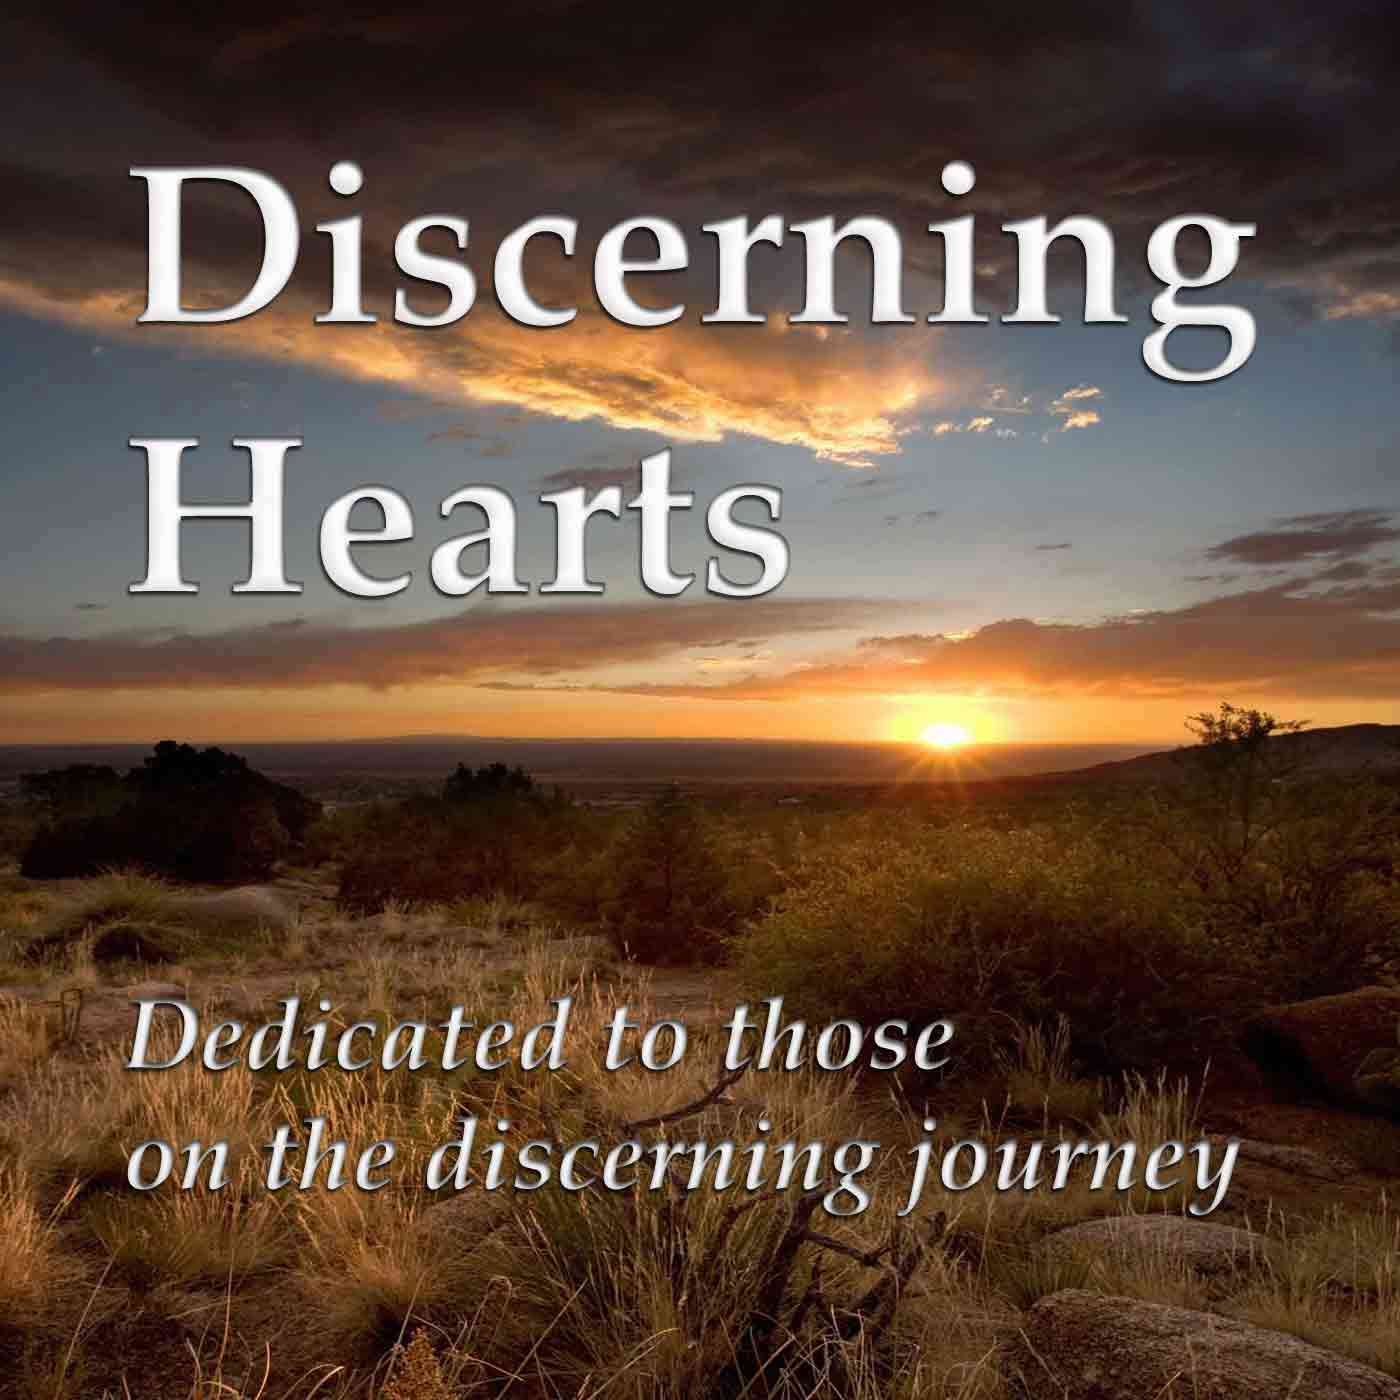 How the Church Lost the Gift of Discernment